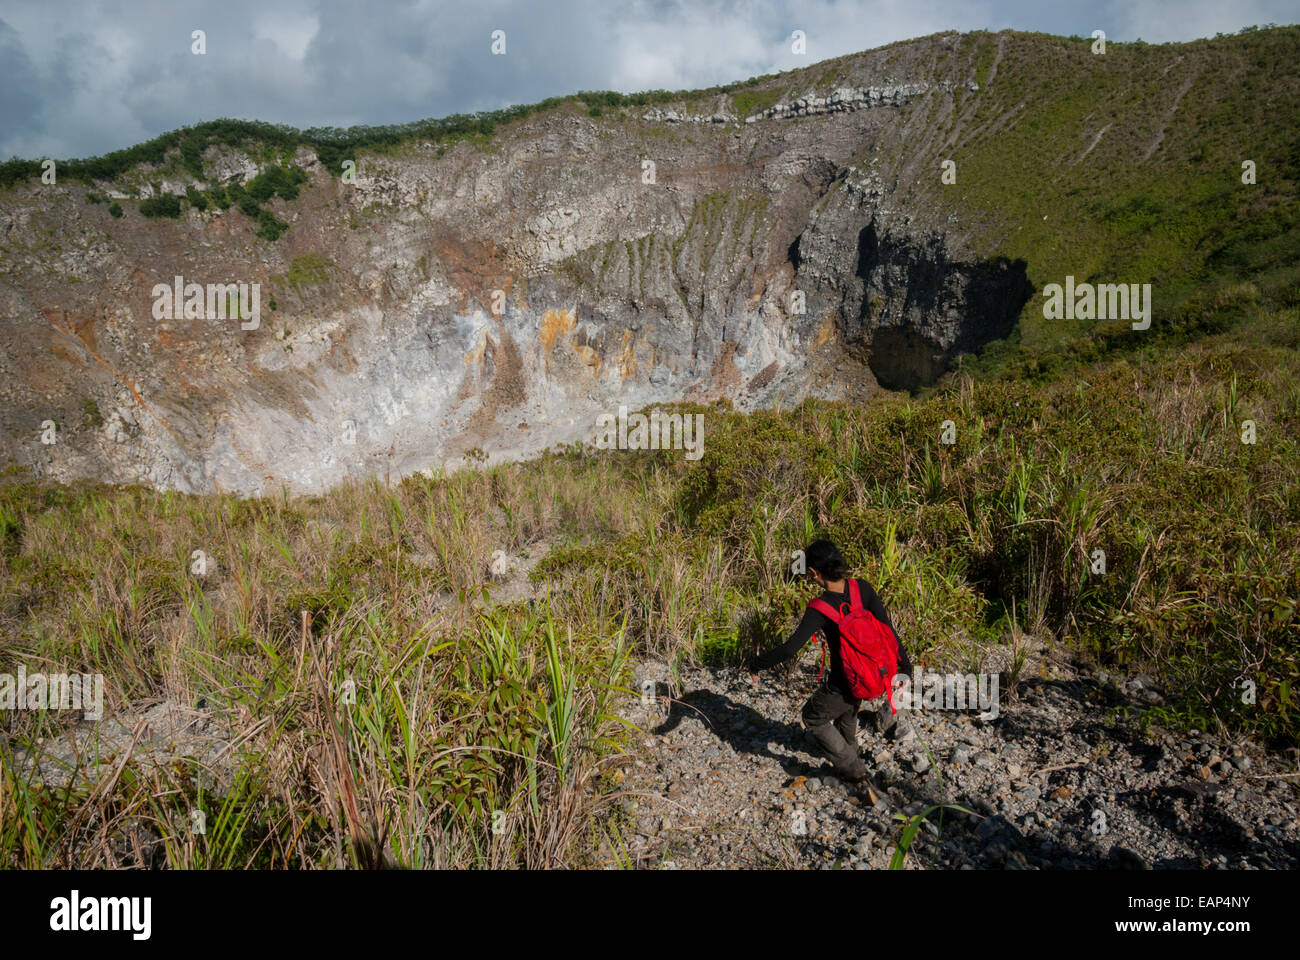 A journalist is stepping on the crater rim of Mount Mahawu volcano in Tomohon, North Sulawesi, Indonesia. Stock Photo